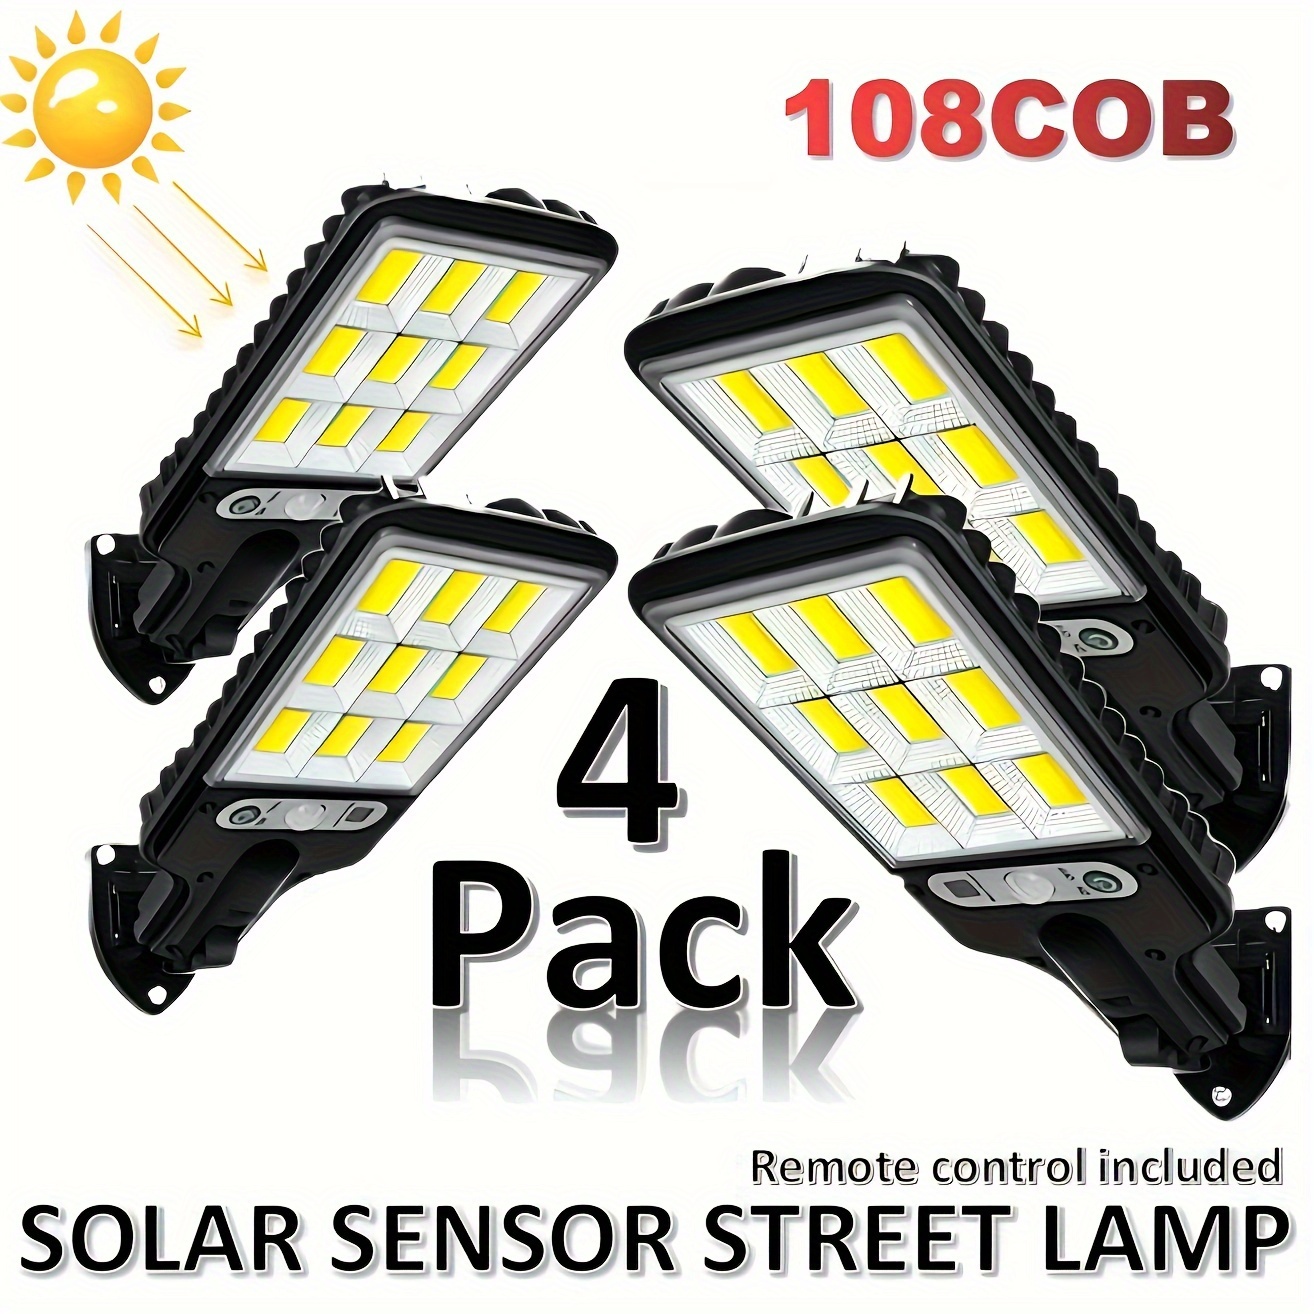 

2/4pcs Solar Street Lamp, 108 Cob Wall Light With Remote Control, Outdoor Waterproof Motion Sensor Led Garden Light With 3 Lighting Modes, Solar Sensor Street Light For Garden Wall Patio Lighting